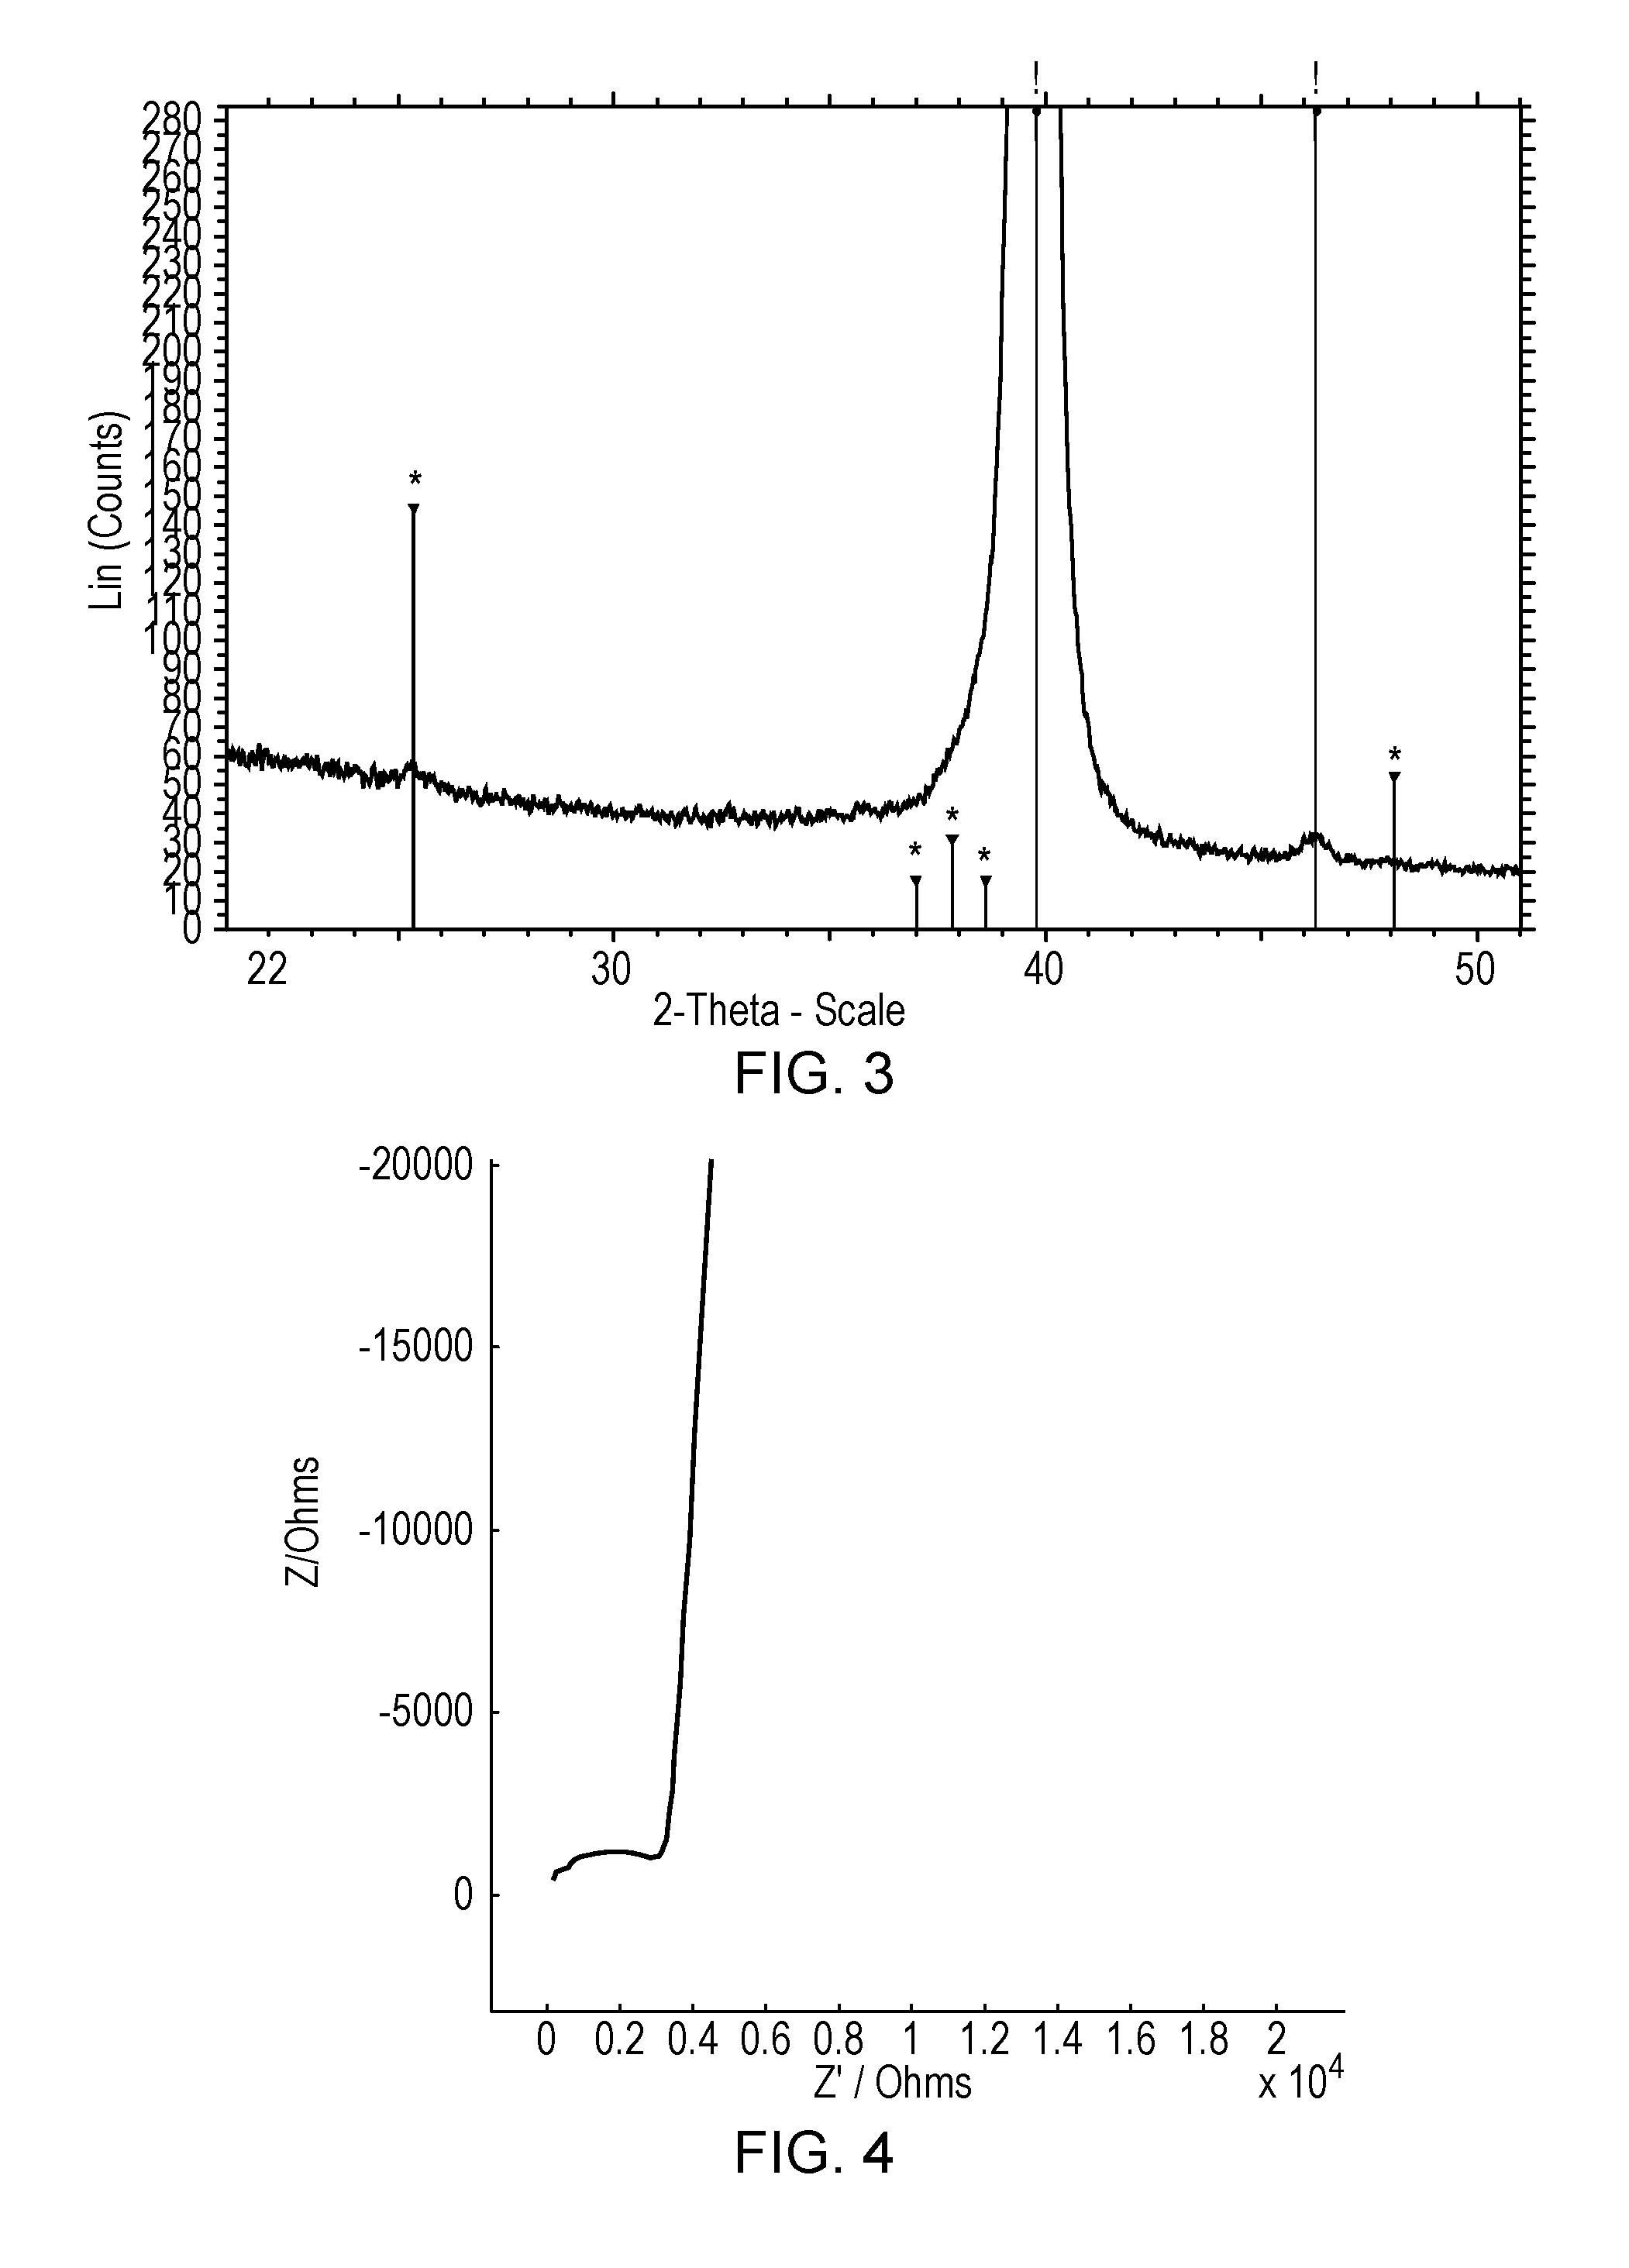 Vapour deposition method for fabricating lithium-containing thin film layered structures